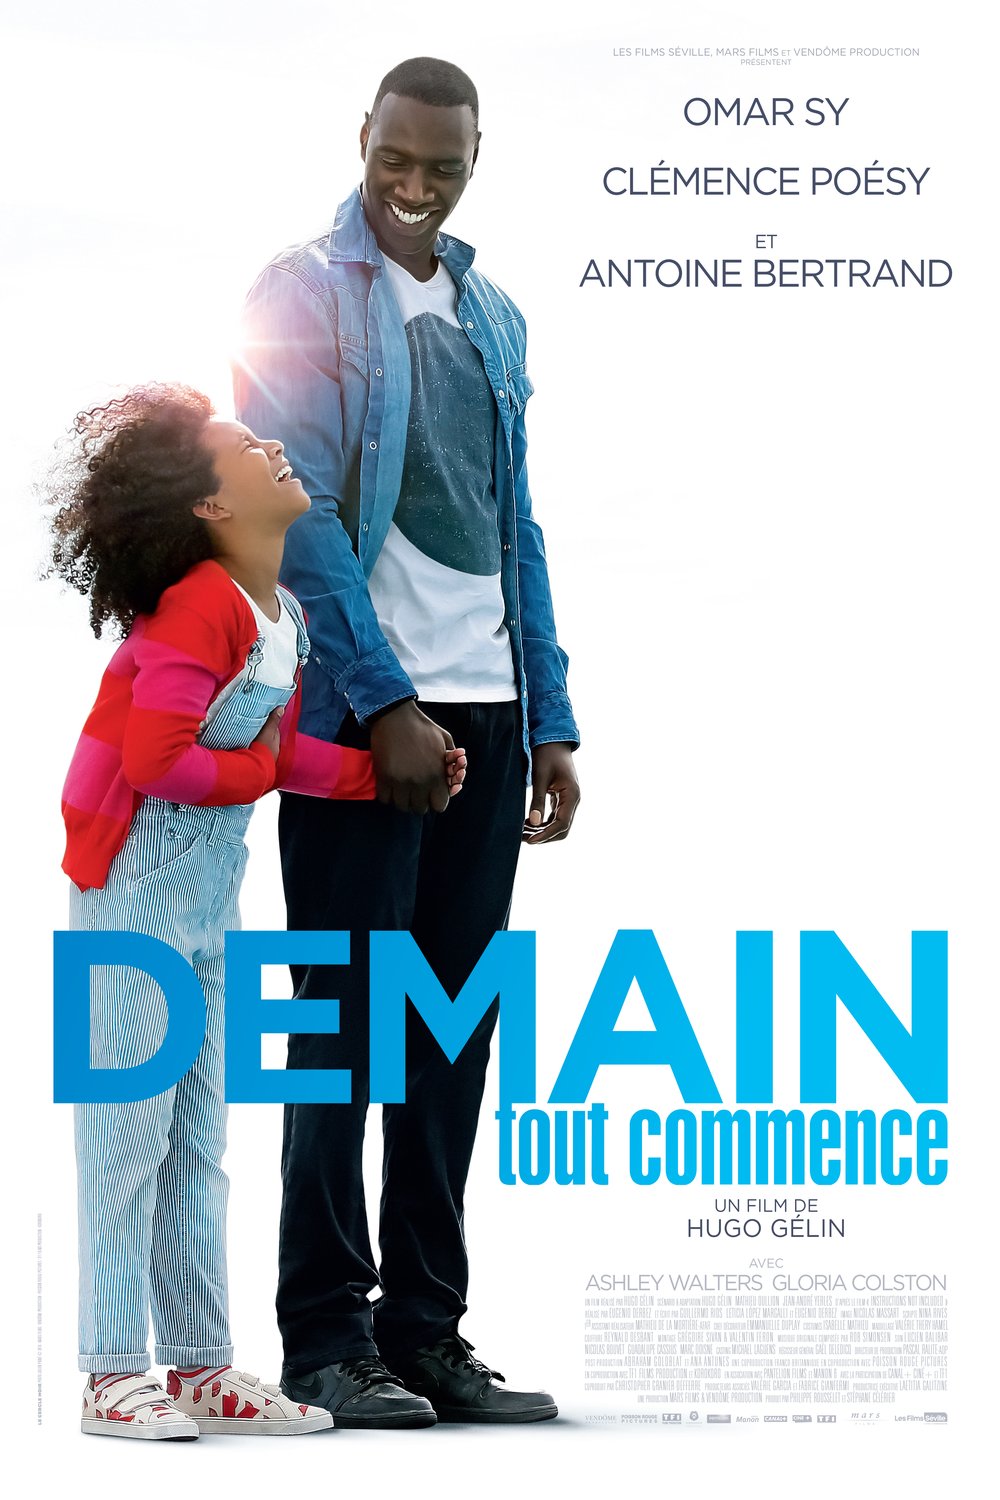 Poster of the movie Demain tout commence